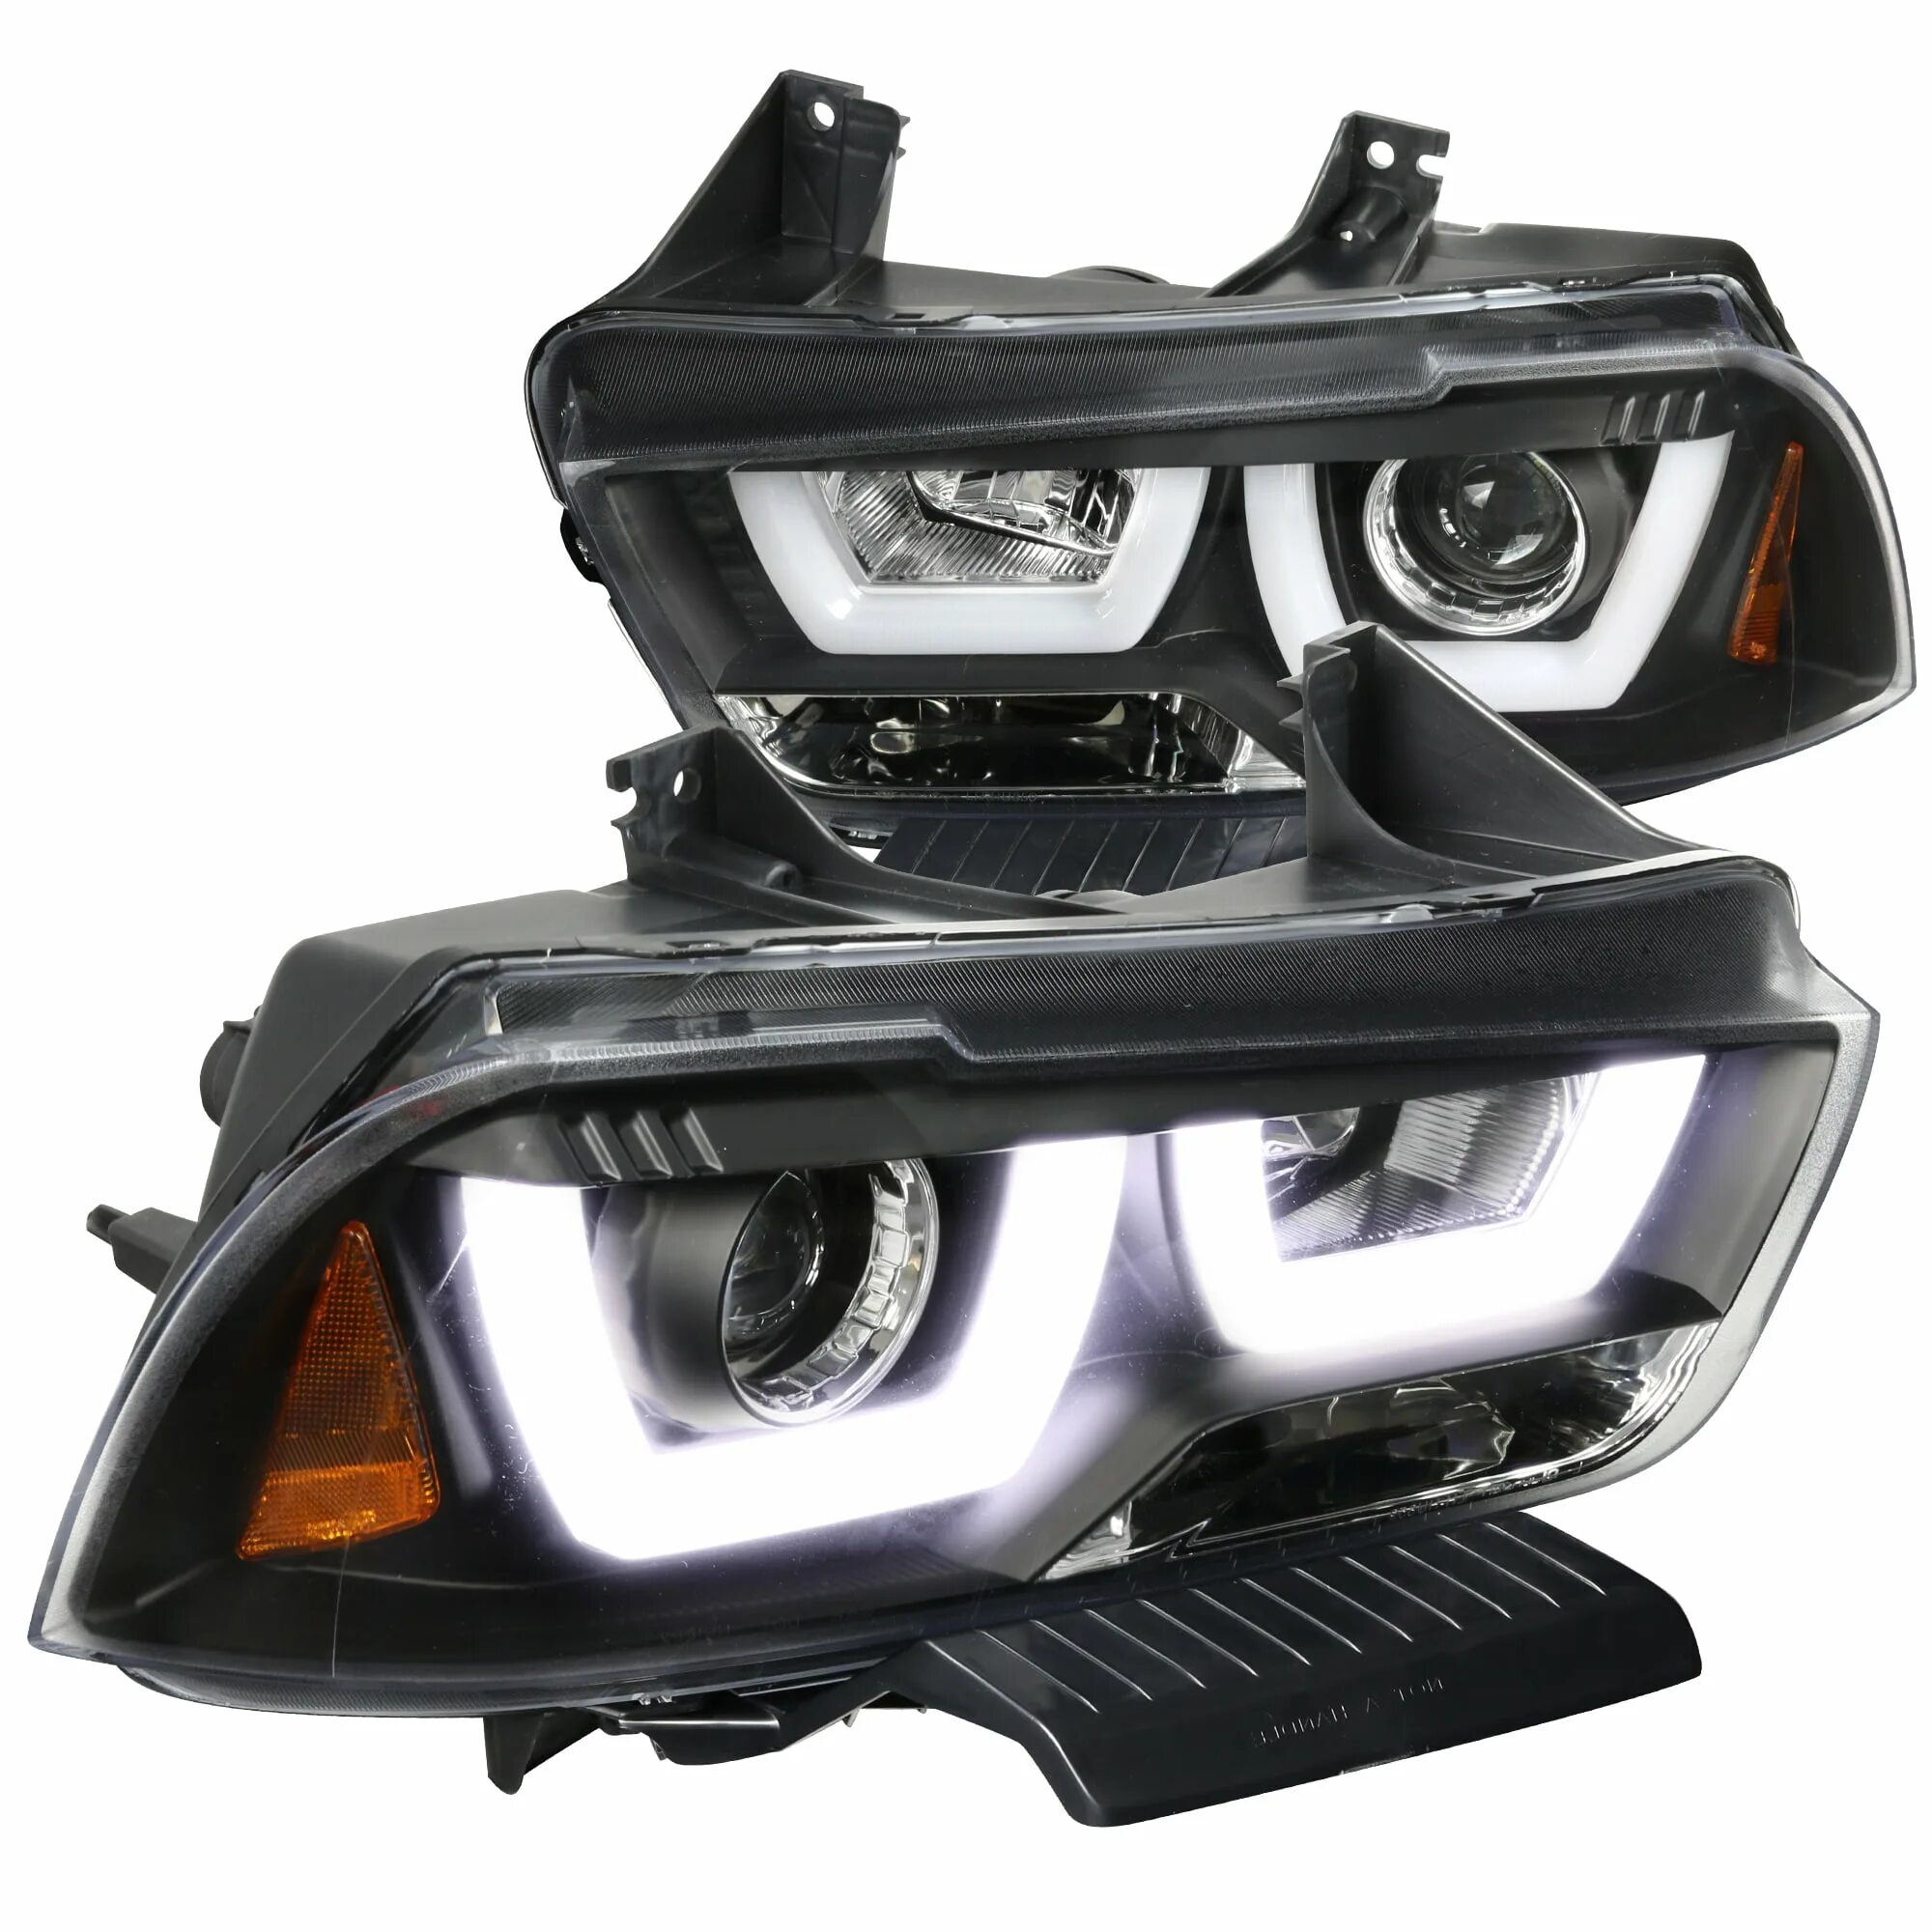 For 2012 2013 2014 Jeep Compass led Headlight with bi-Xenon Projector Lens and led DRL. AMG фары. Фары AMG на десятку. АМГ фары на десятку.